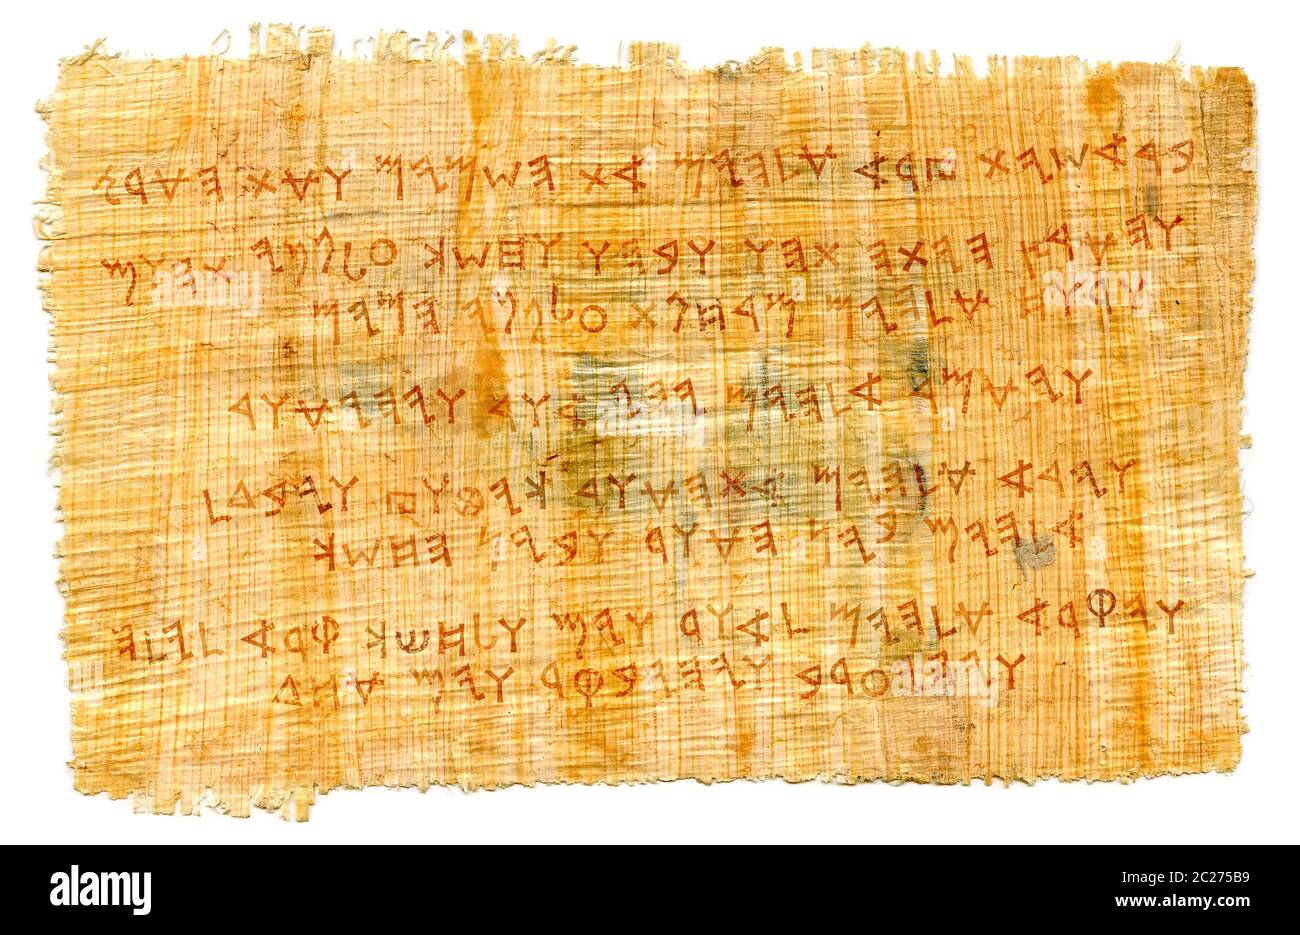 The Phœnician manuscript. The most first Alphabet in The World, Proto-writing. The Middle East, c.1500–1200 B.C. Ancient papy Stock Photo